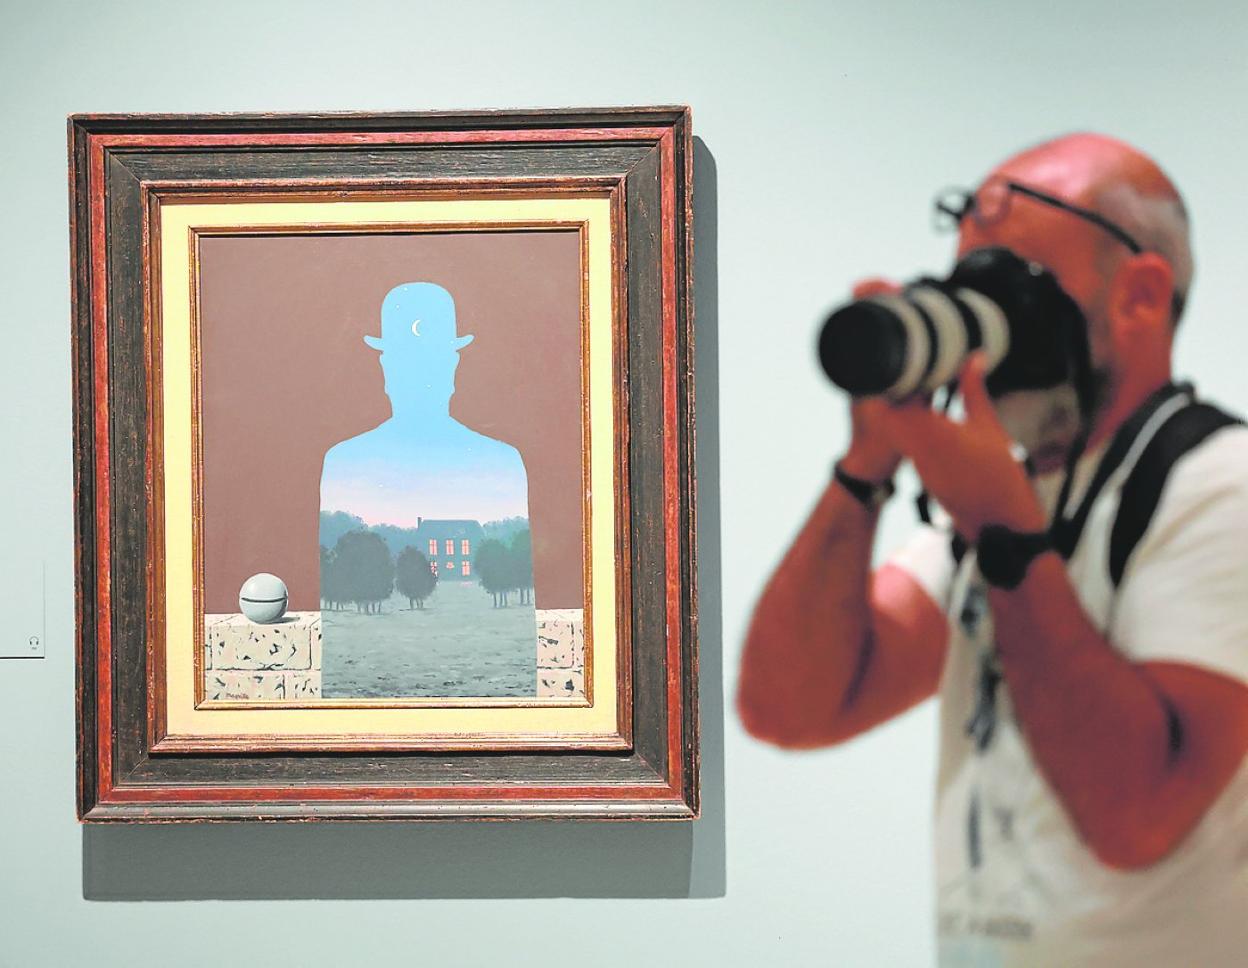 The Thyssen Malaga reveals the audacity of Belgian painting: René Magritte and other artists